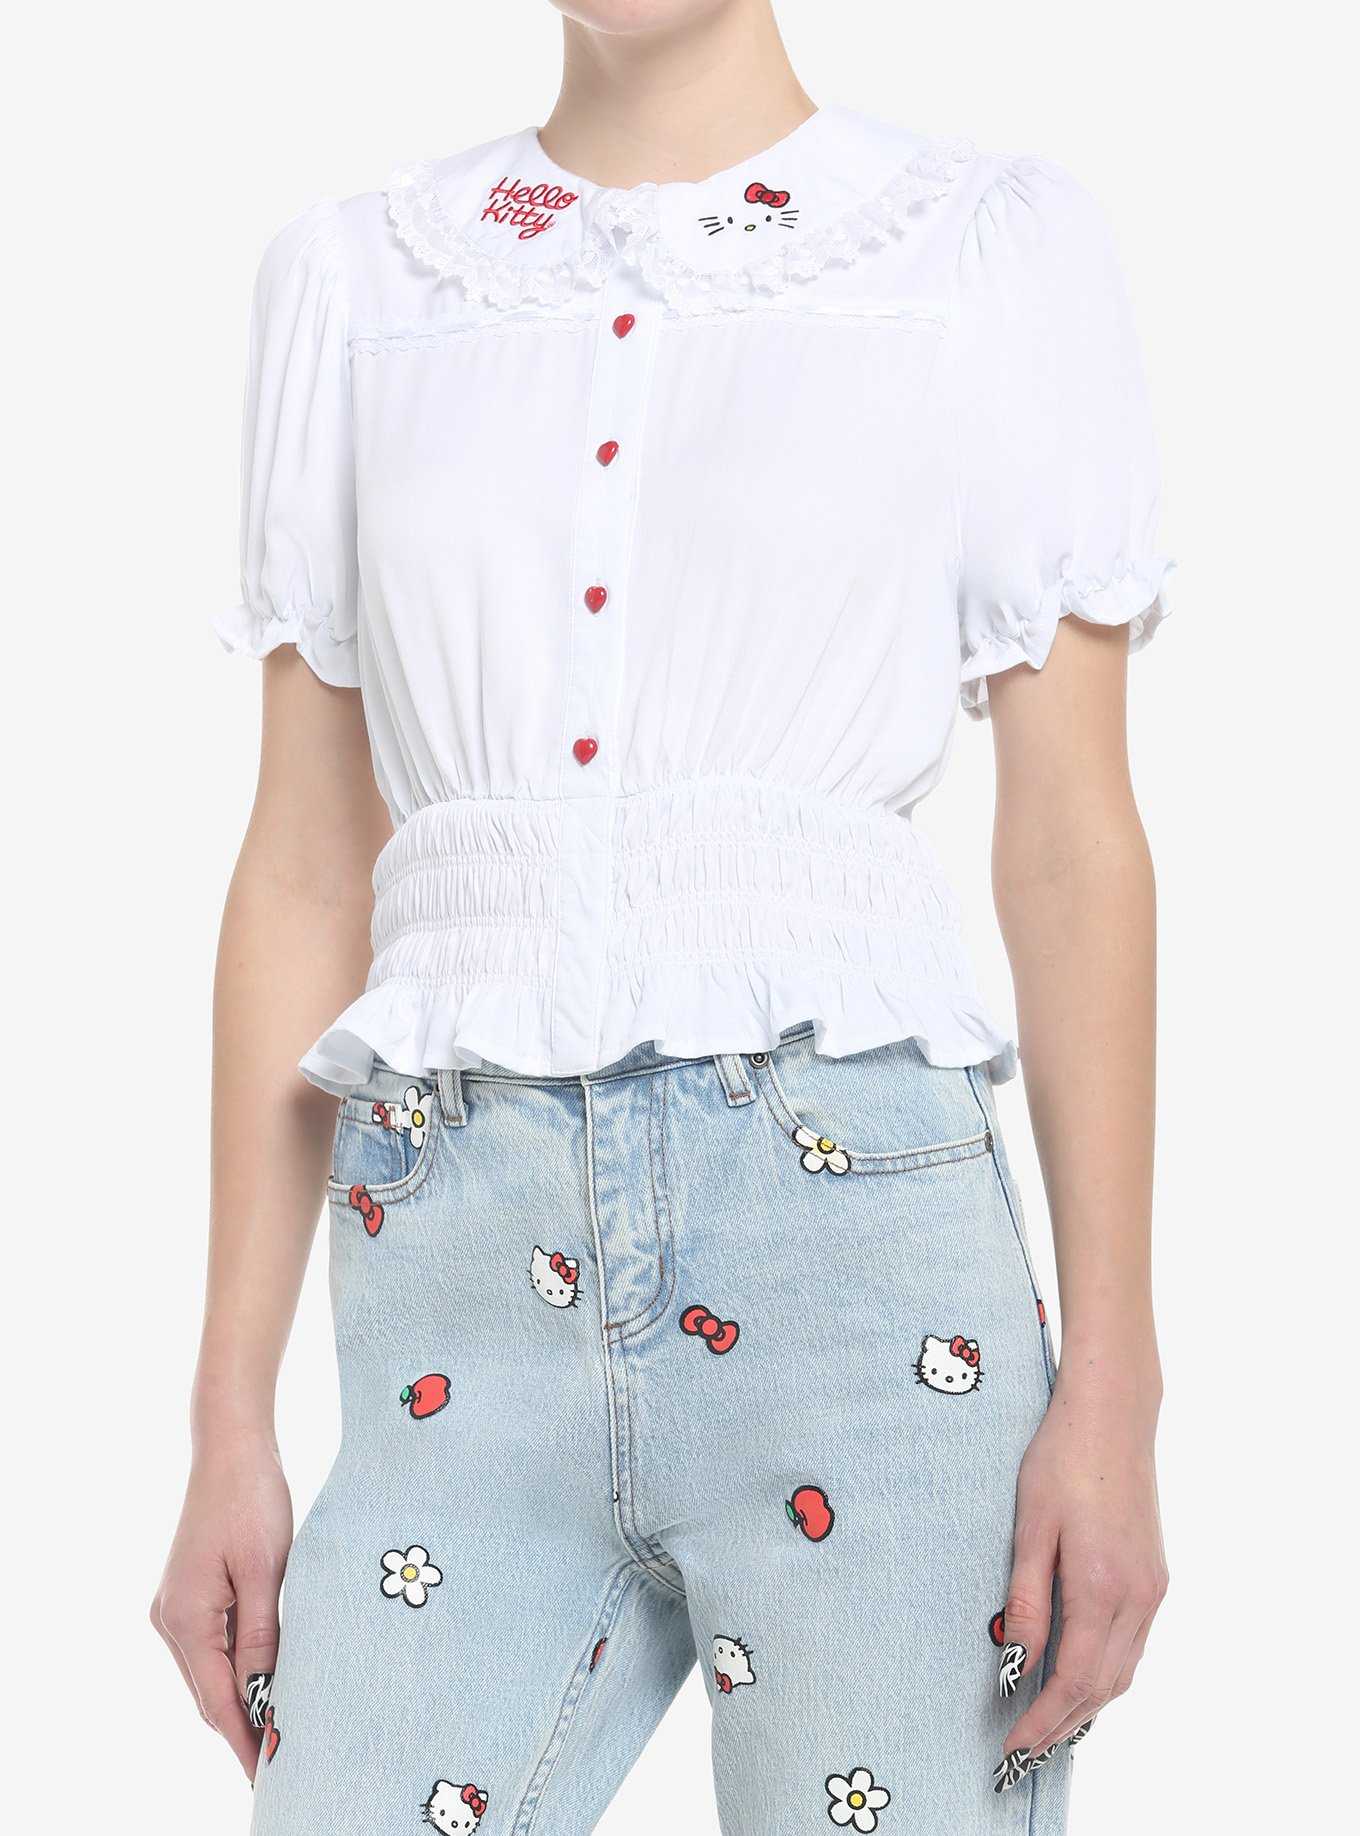 Hello Kitty Lace Girls Woven Button-Up Top, , hi-res